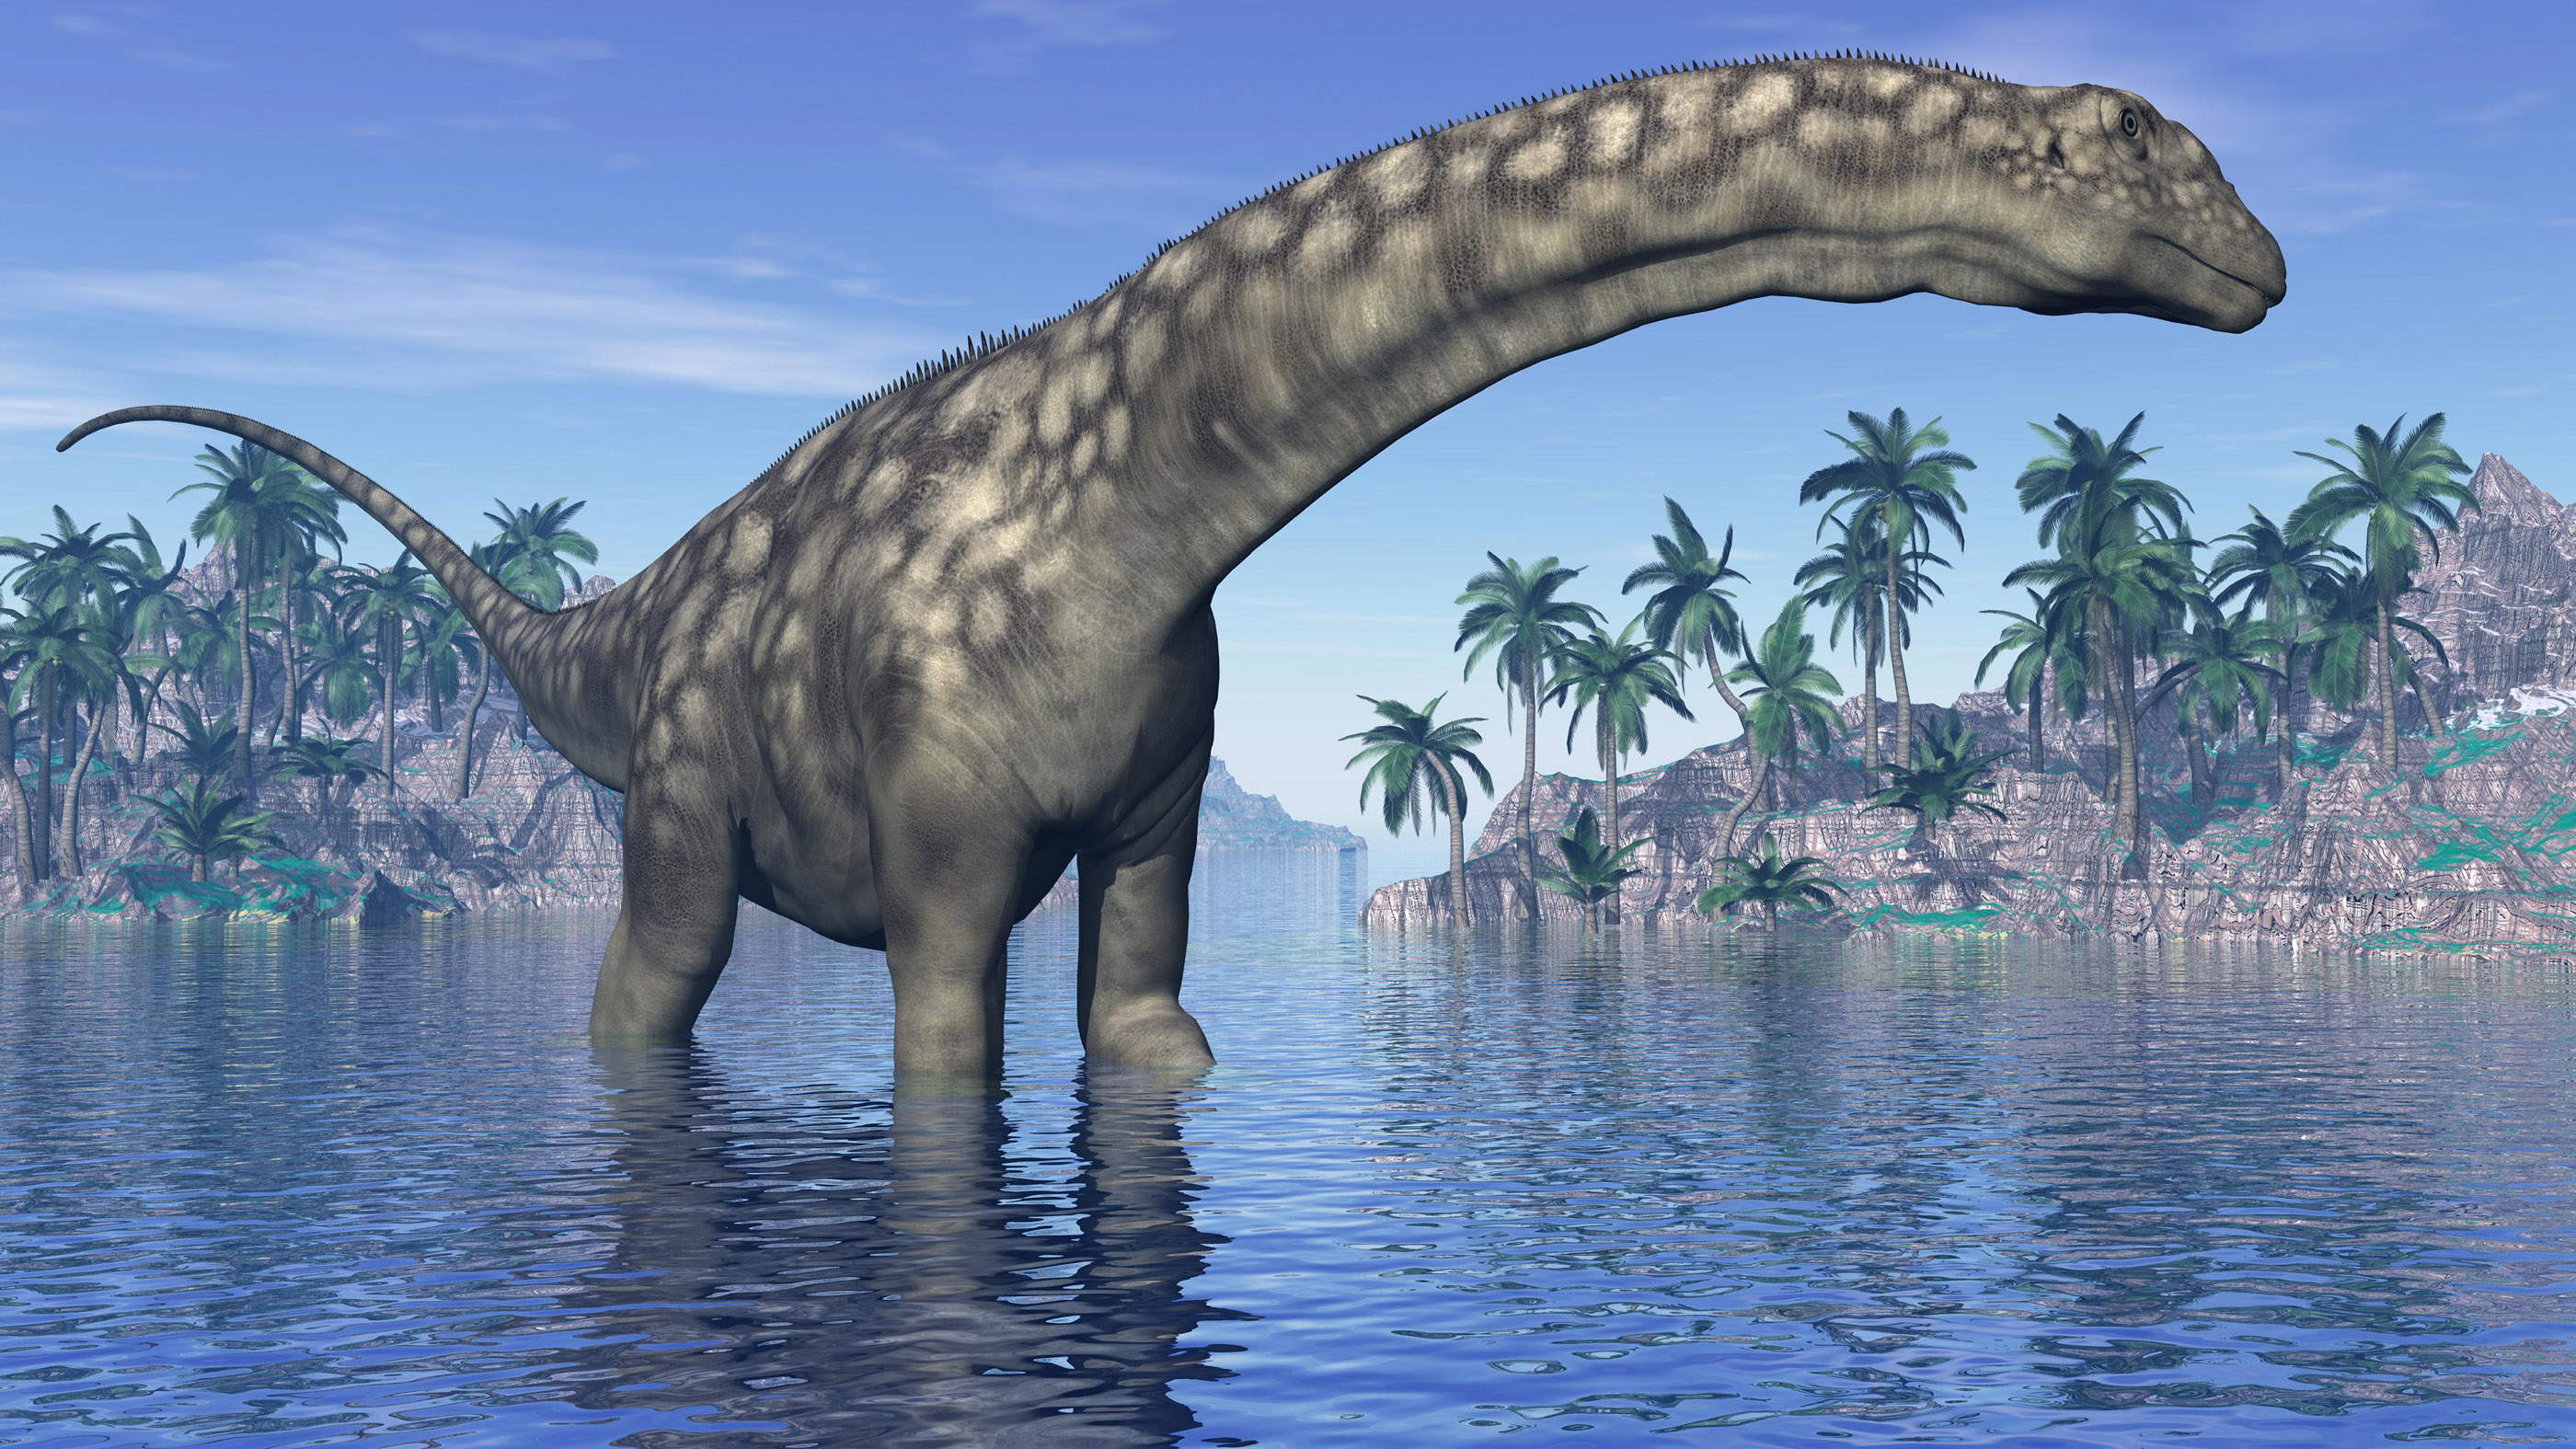 Massive new dinosaur might be the largest creature to ever roam Earth |  Live Science